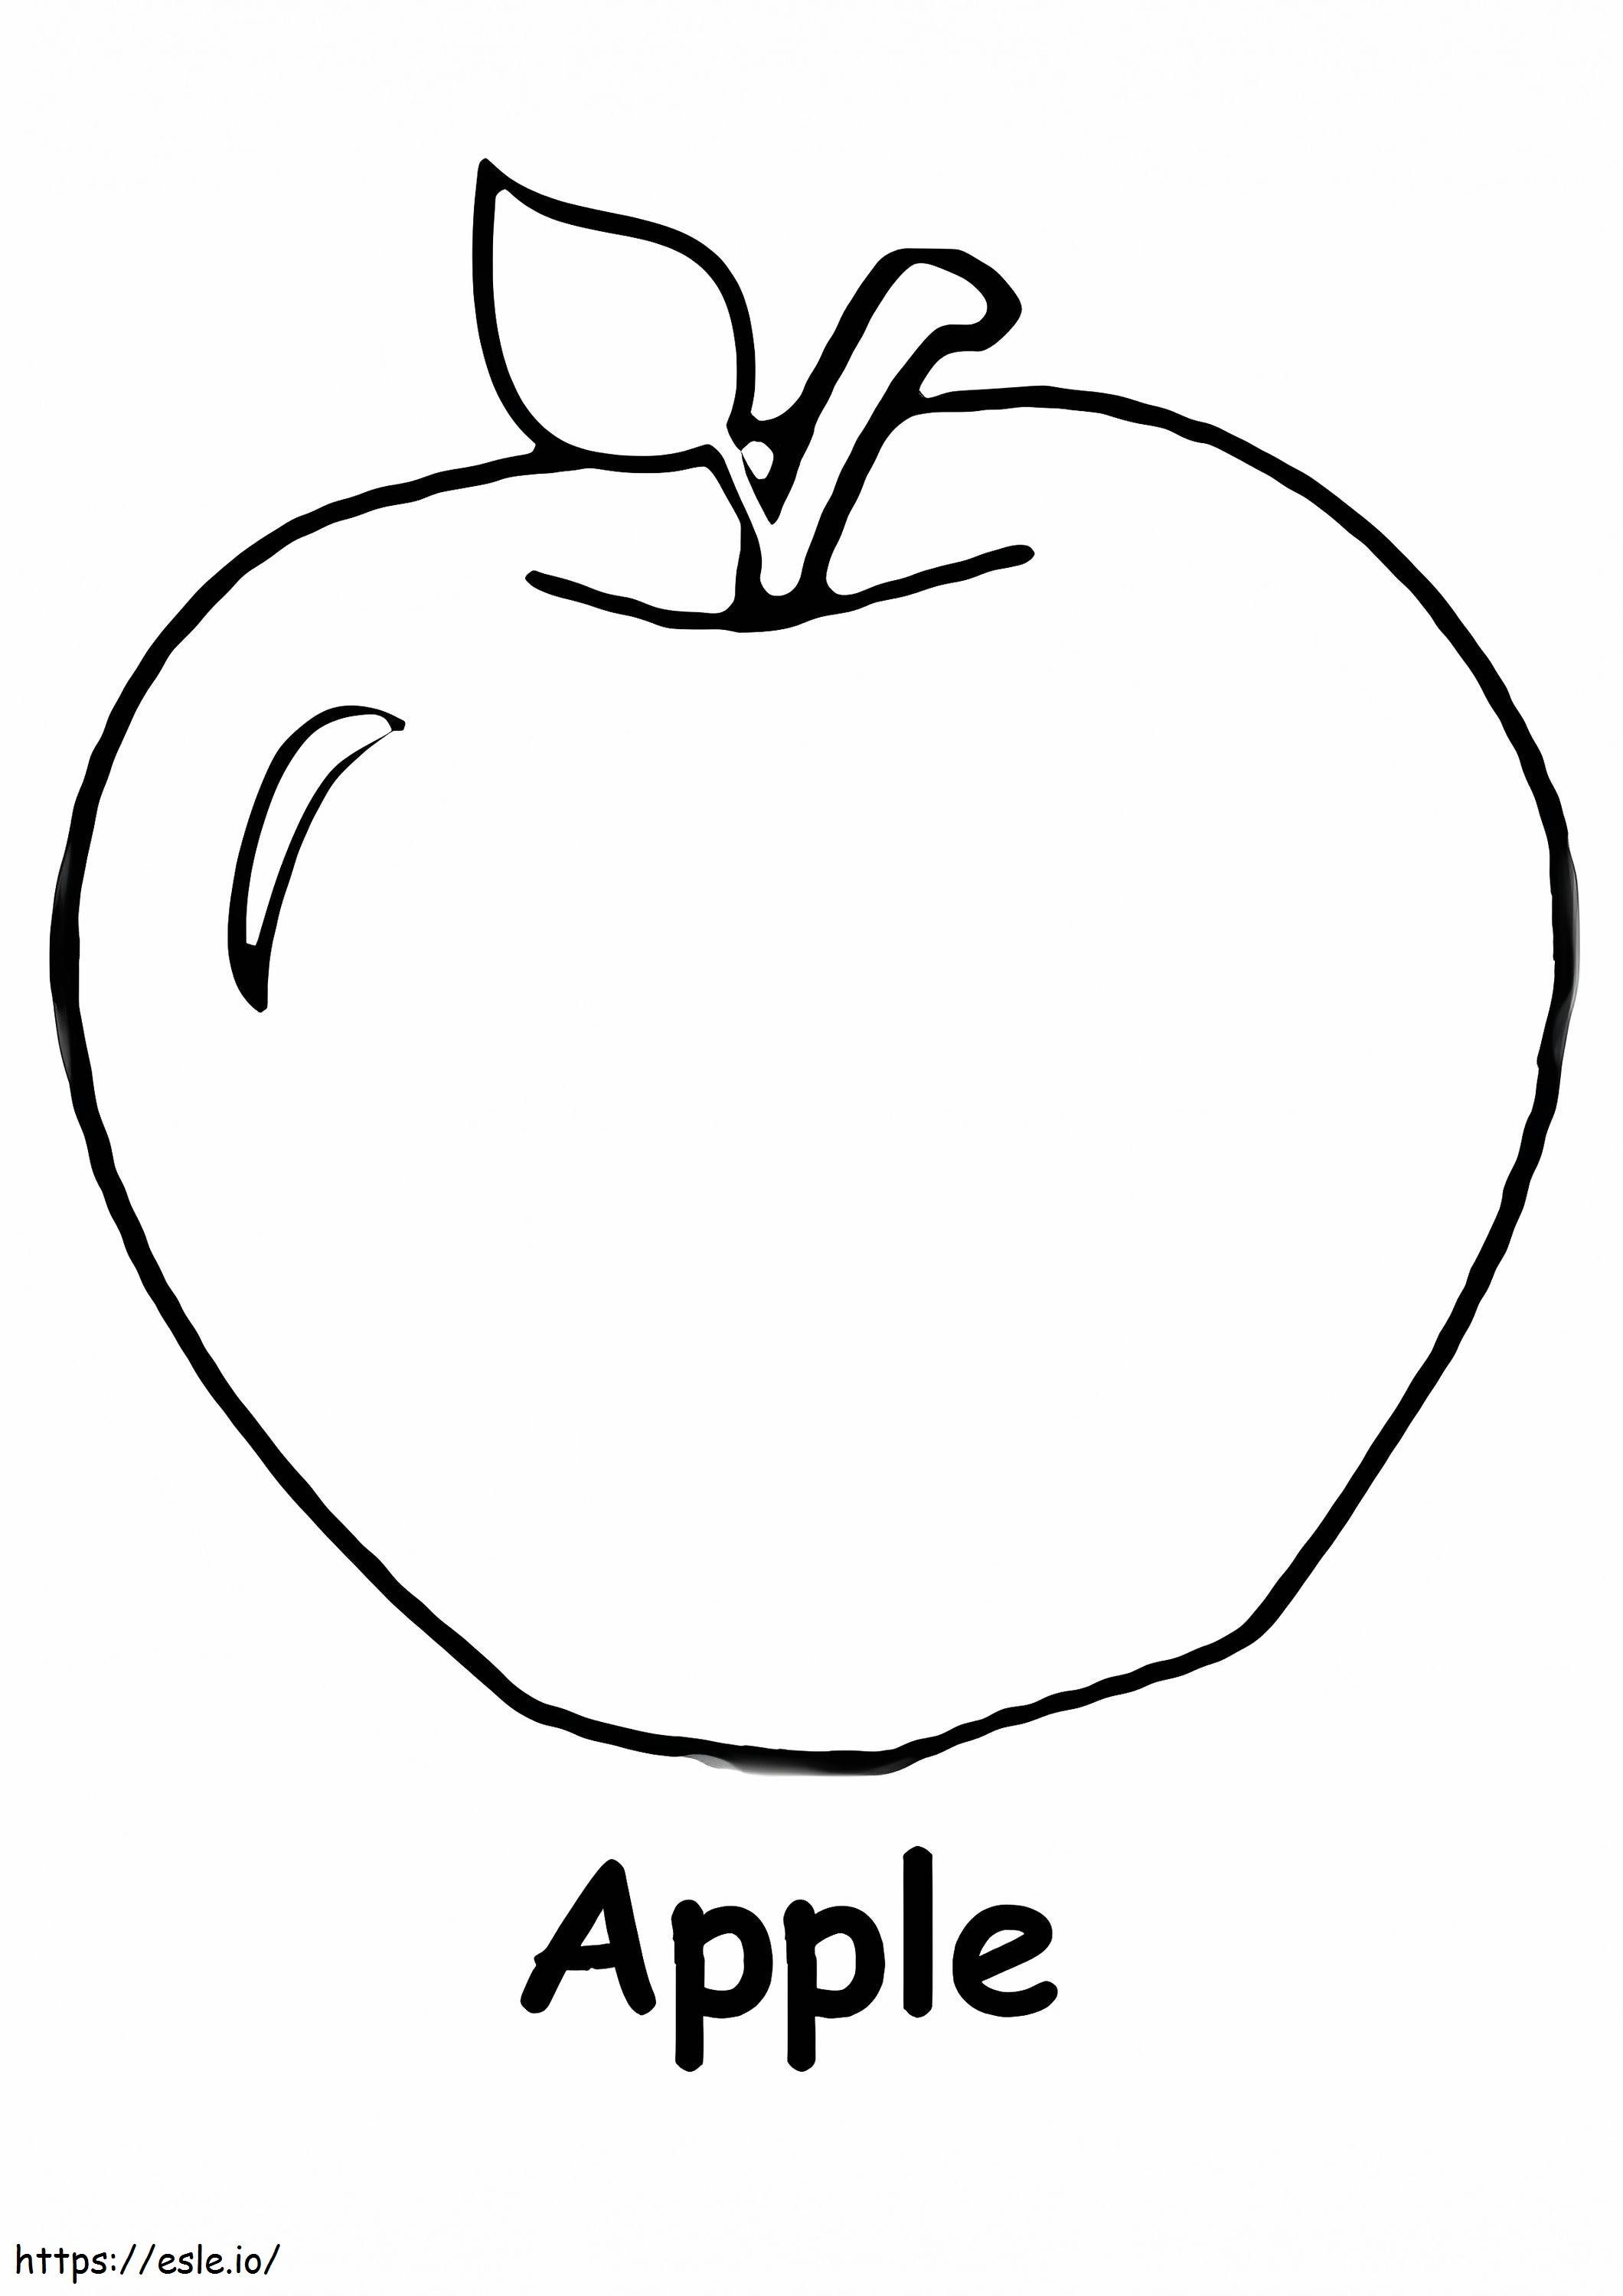 An Apple coloring page